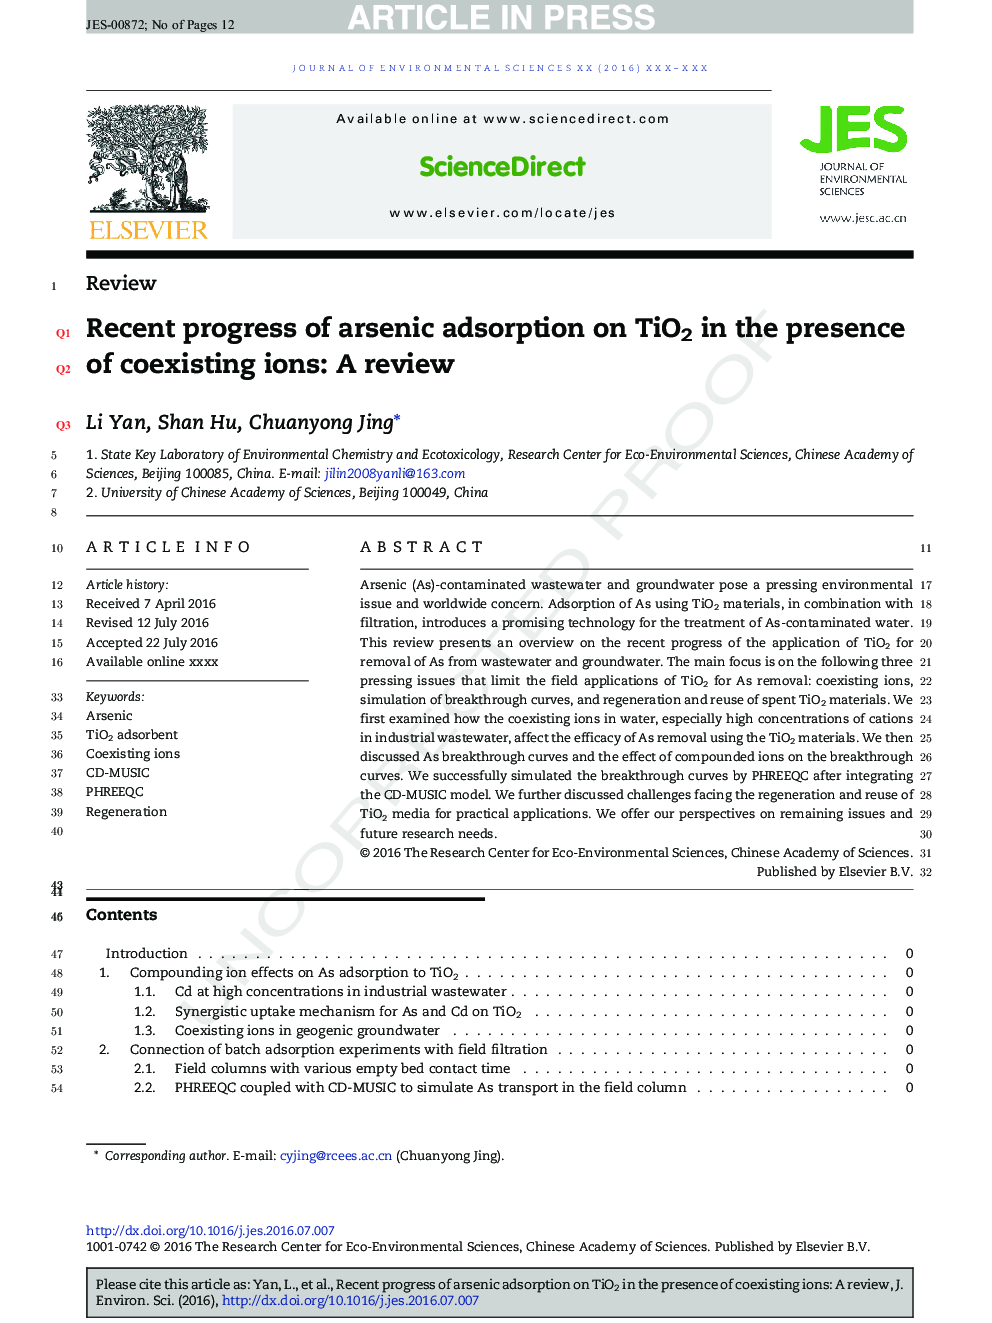 Recent progress of arsenic adsorption on TiO2 in the presence of coexisting ions: A review